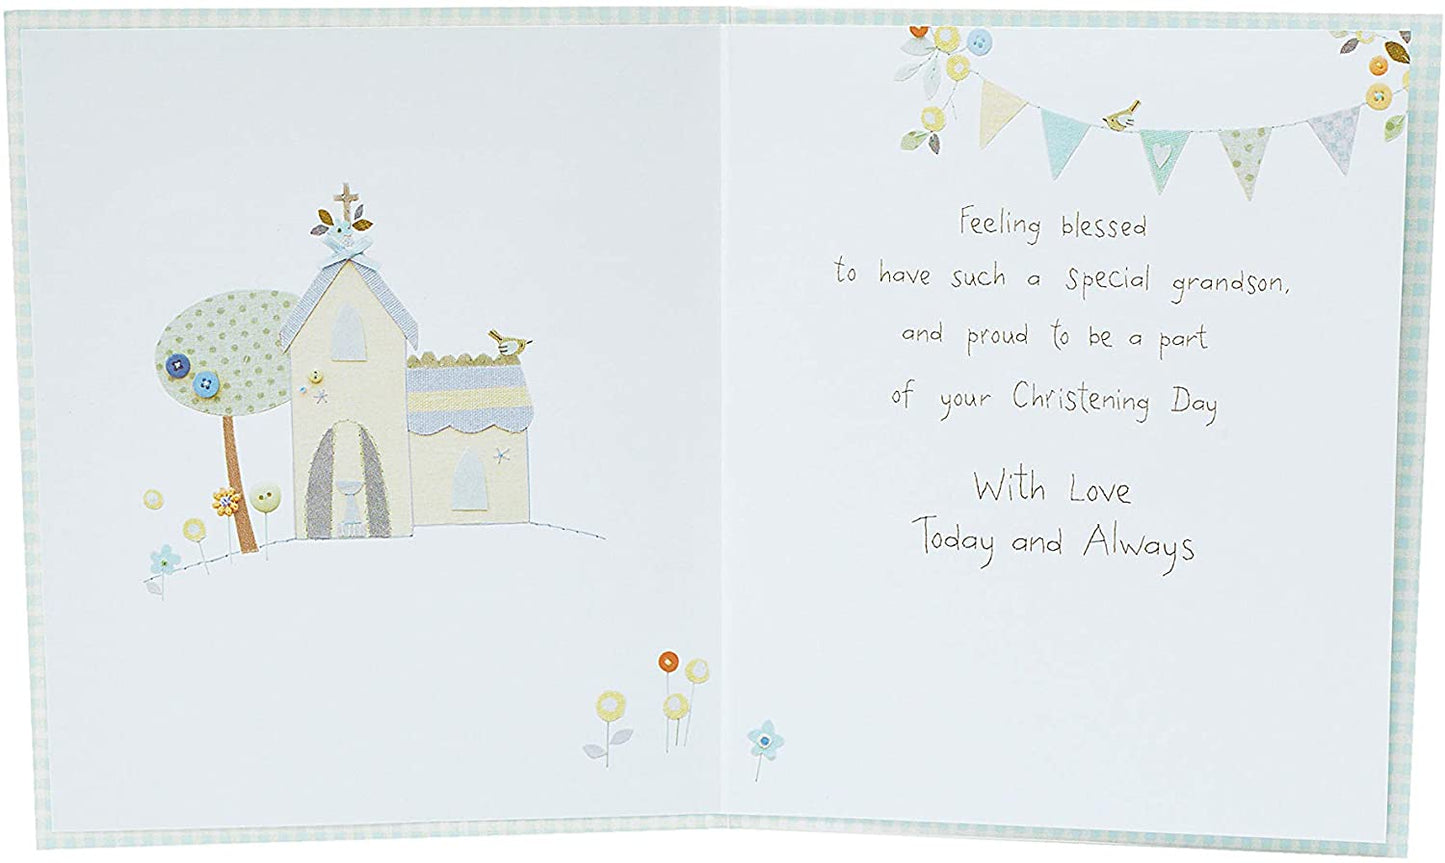 For Grandson On Your Christening Day Card